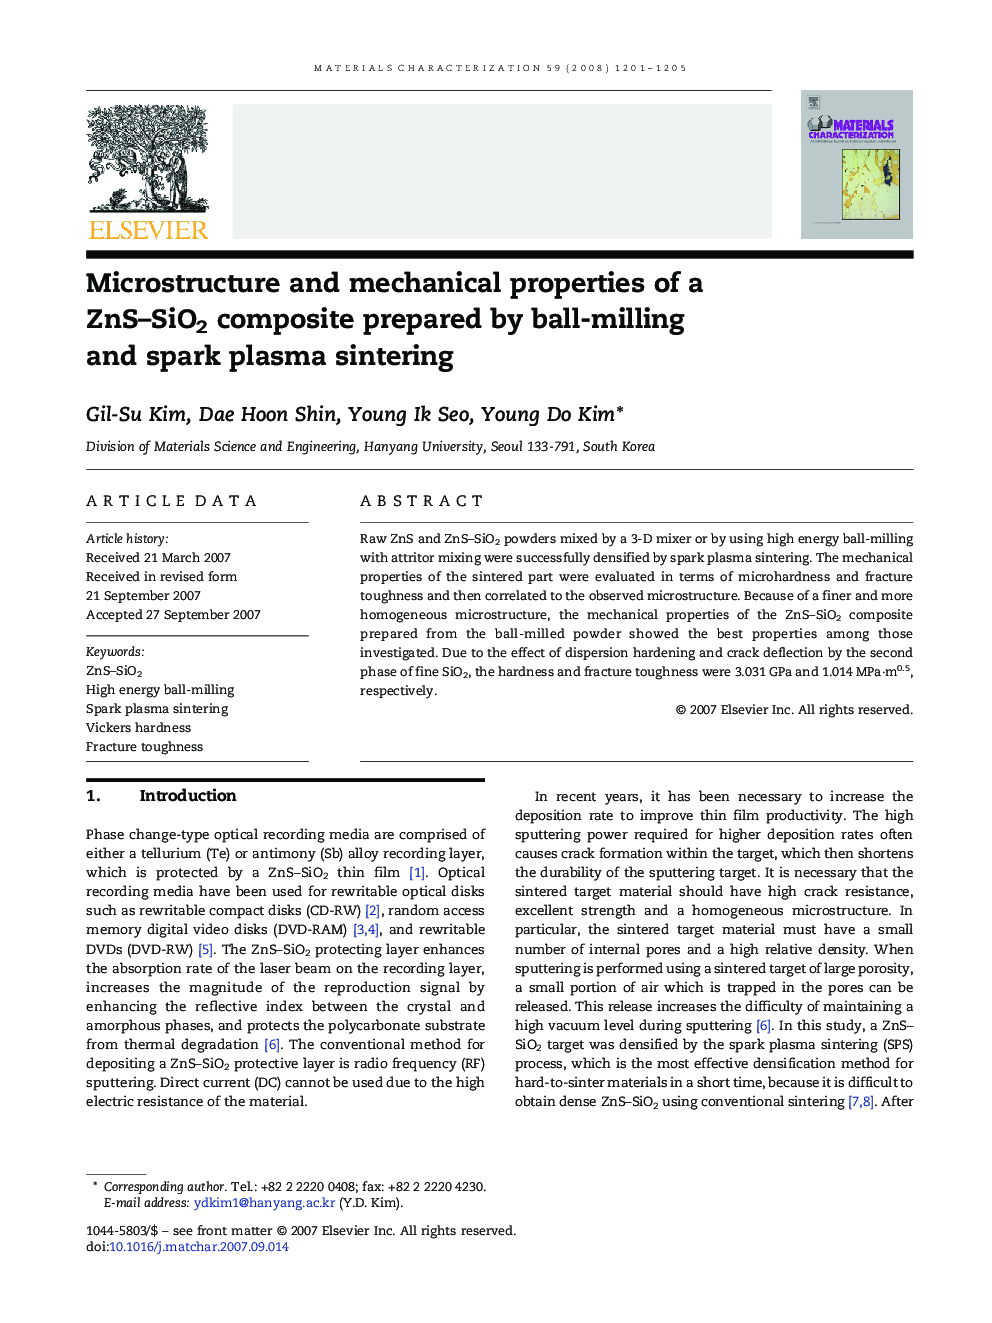 Microstructure and mechanical properties of a ZnS–SiO2 composite prepared by ball-milling and spark plasma sintering